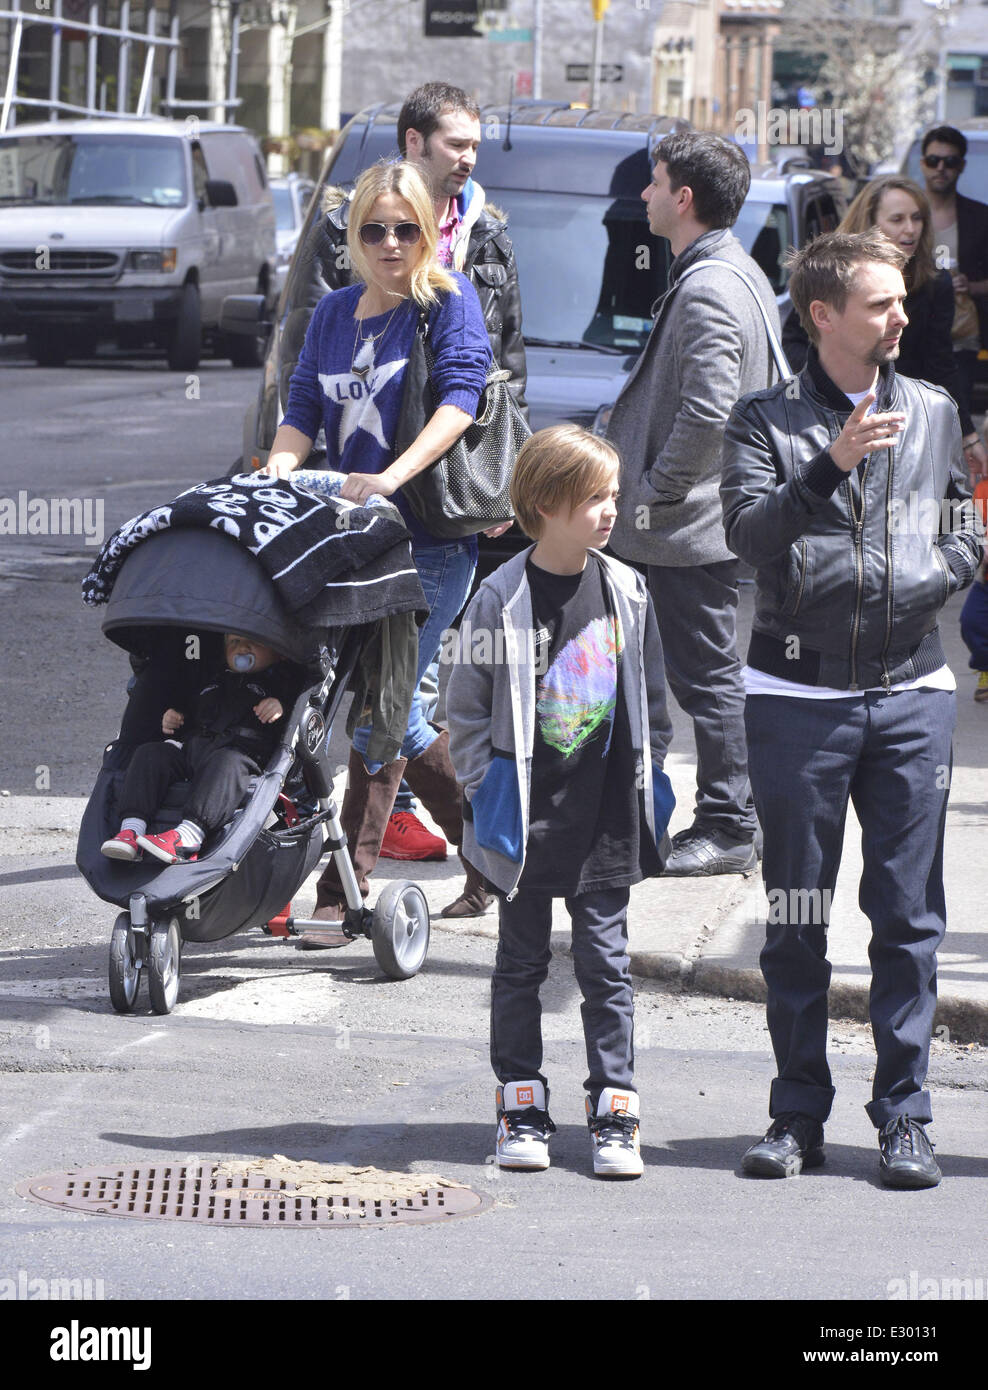 Kate Hudson takes her son Bingham Hawn Bellamy out in a stroller and head for lunch with family at Bubby's restaurant in Manhattan Featuring: Kate Hudson,Matt Bellamy,Bingham Bellamy,Ryder New York